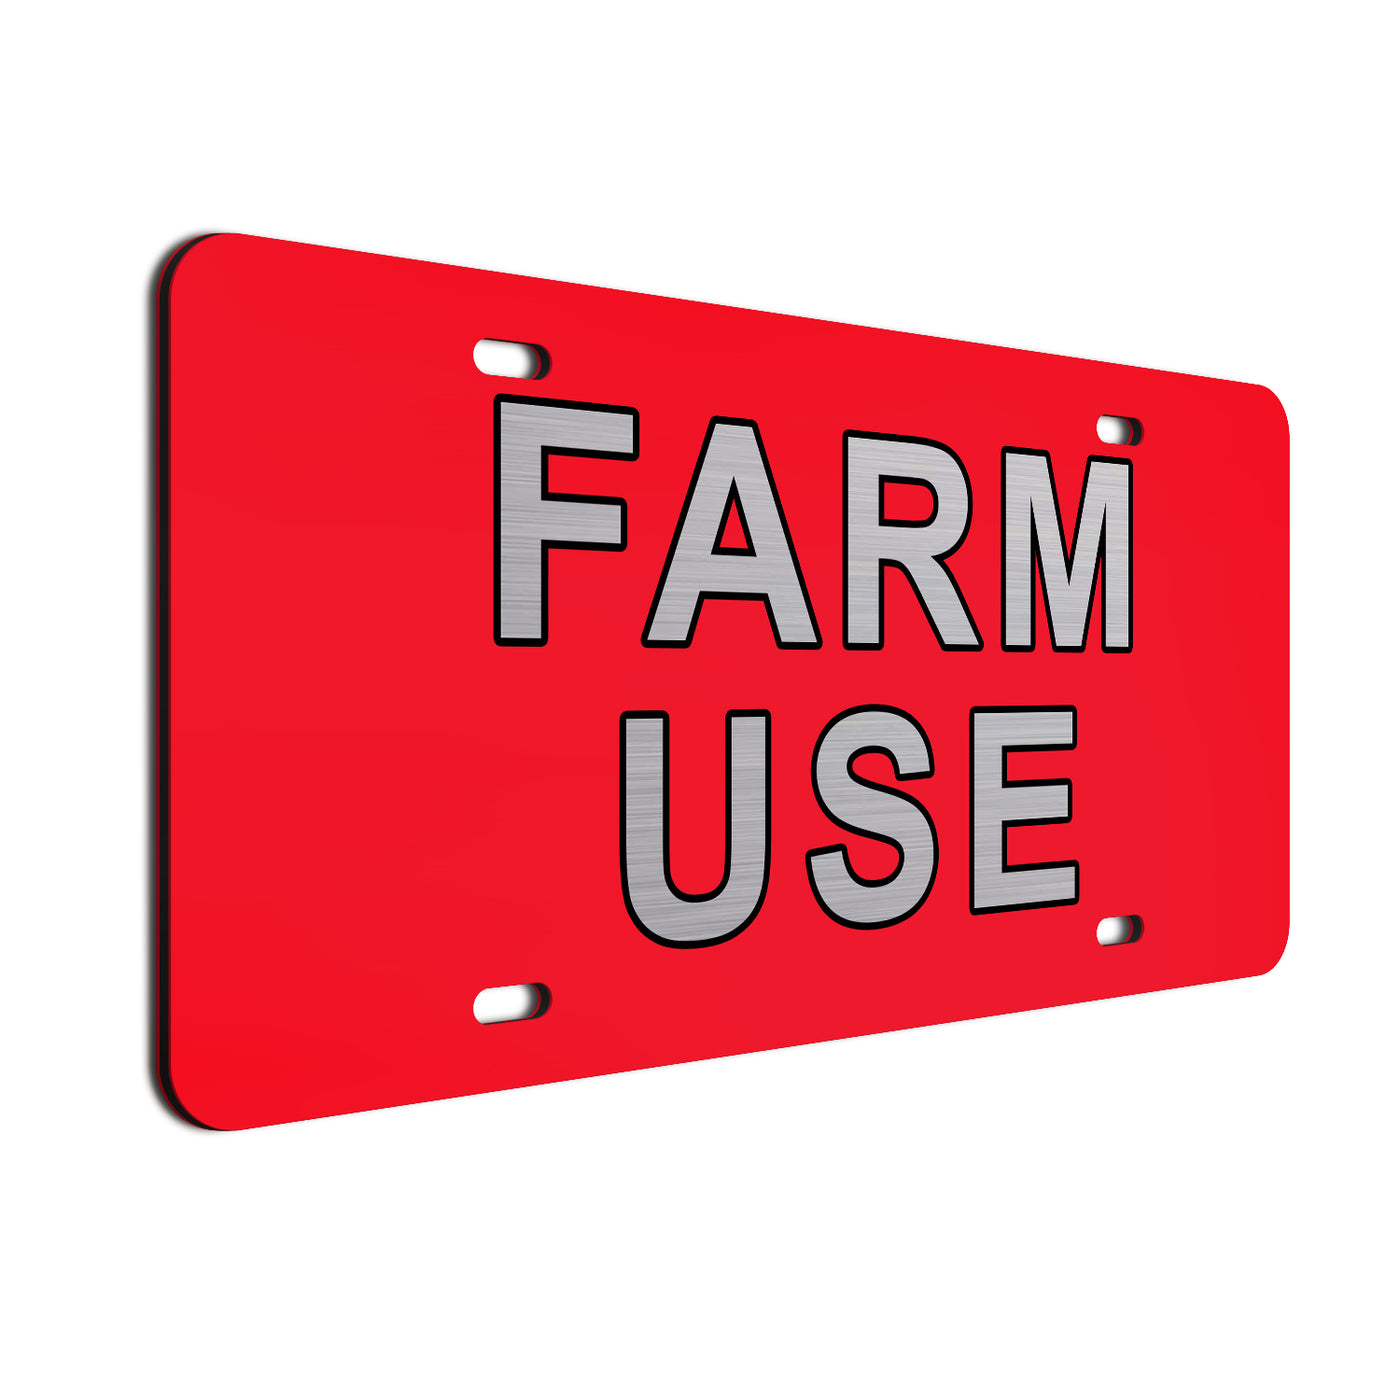 Farm Use License Plate | Durable Car Tag | Gift for Farmers | UV Printed| Made in the USA